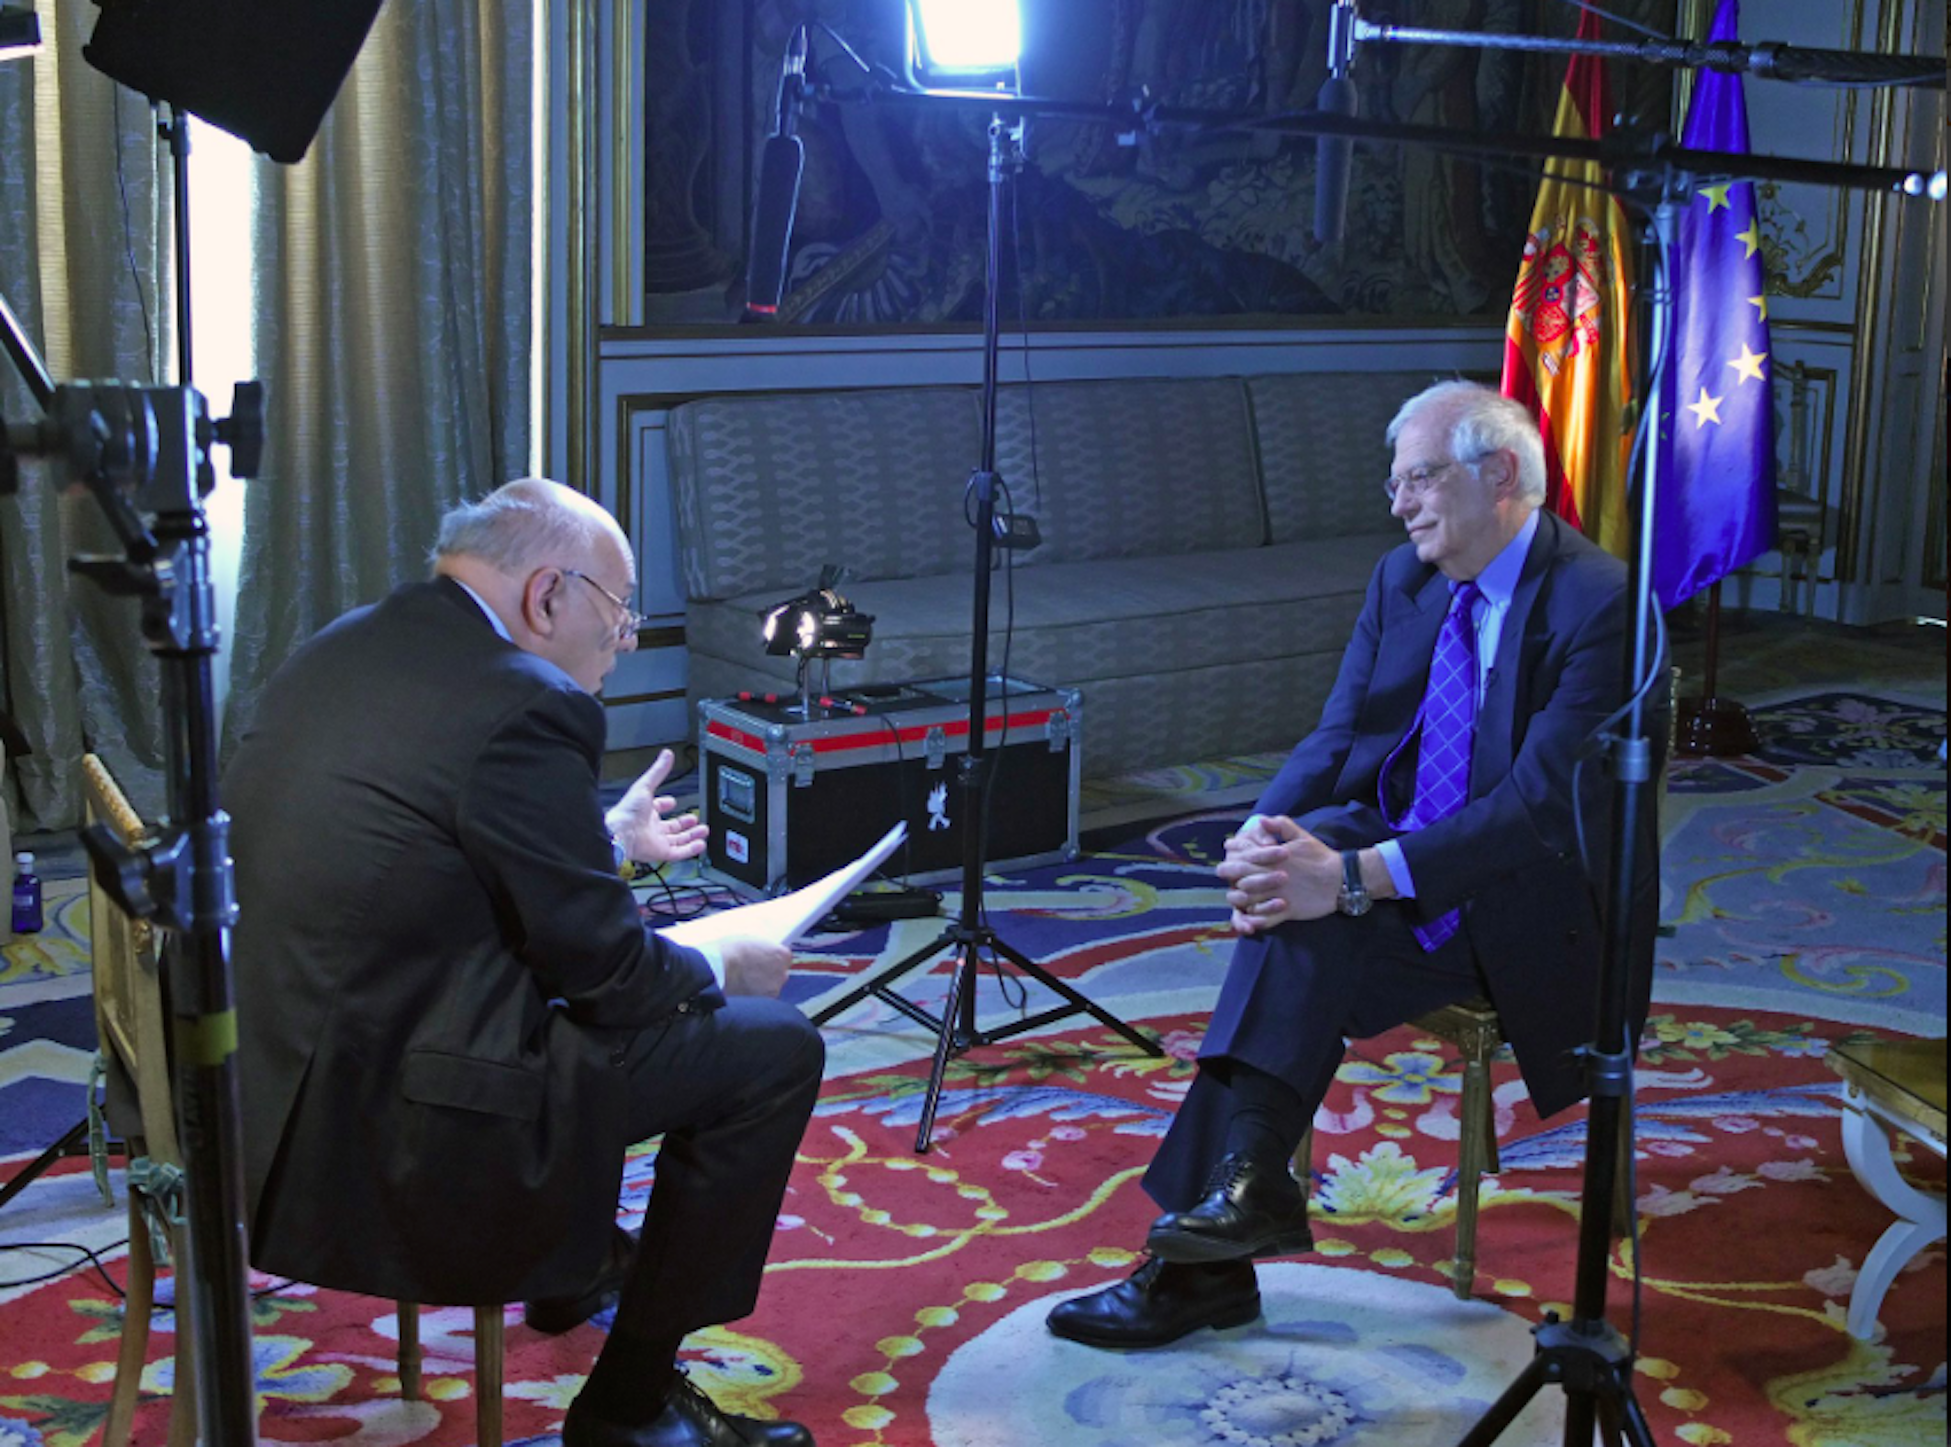 German TV highlights interview moments that angered Spanish foreign minister Borrell